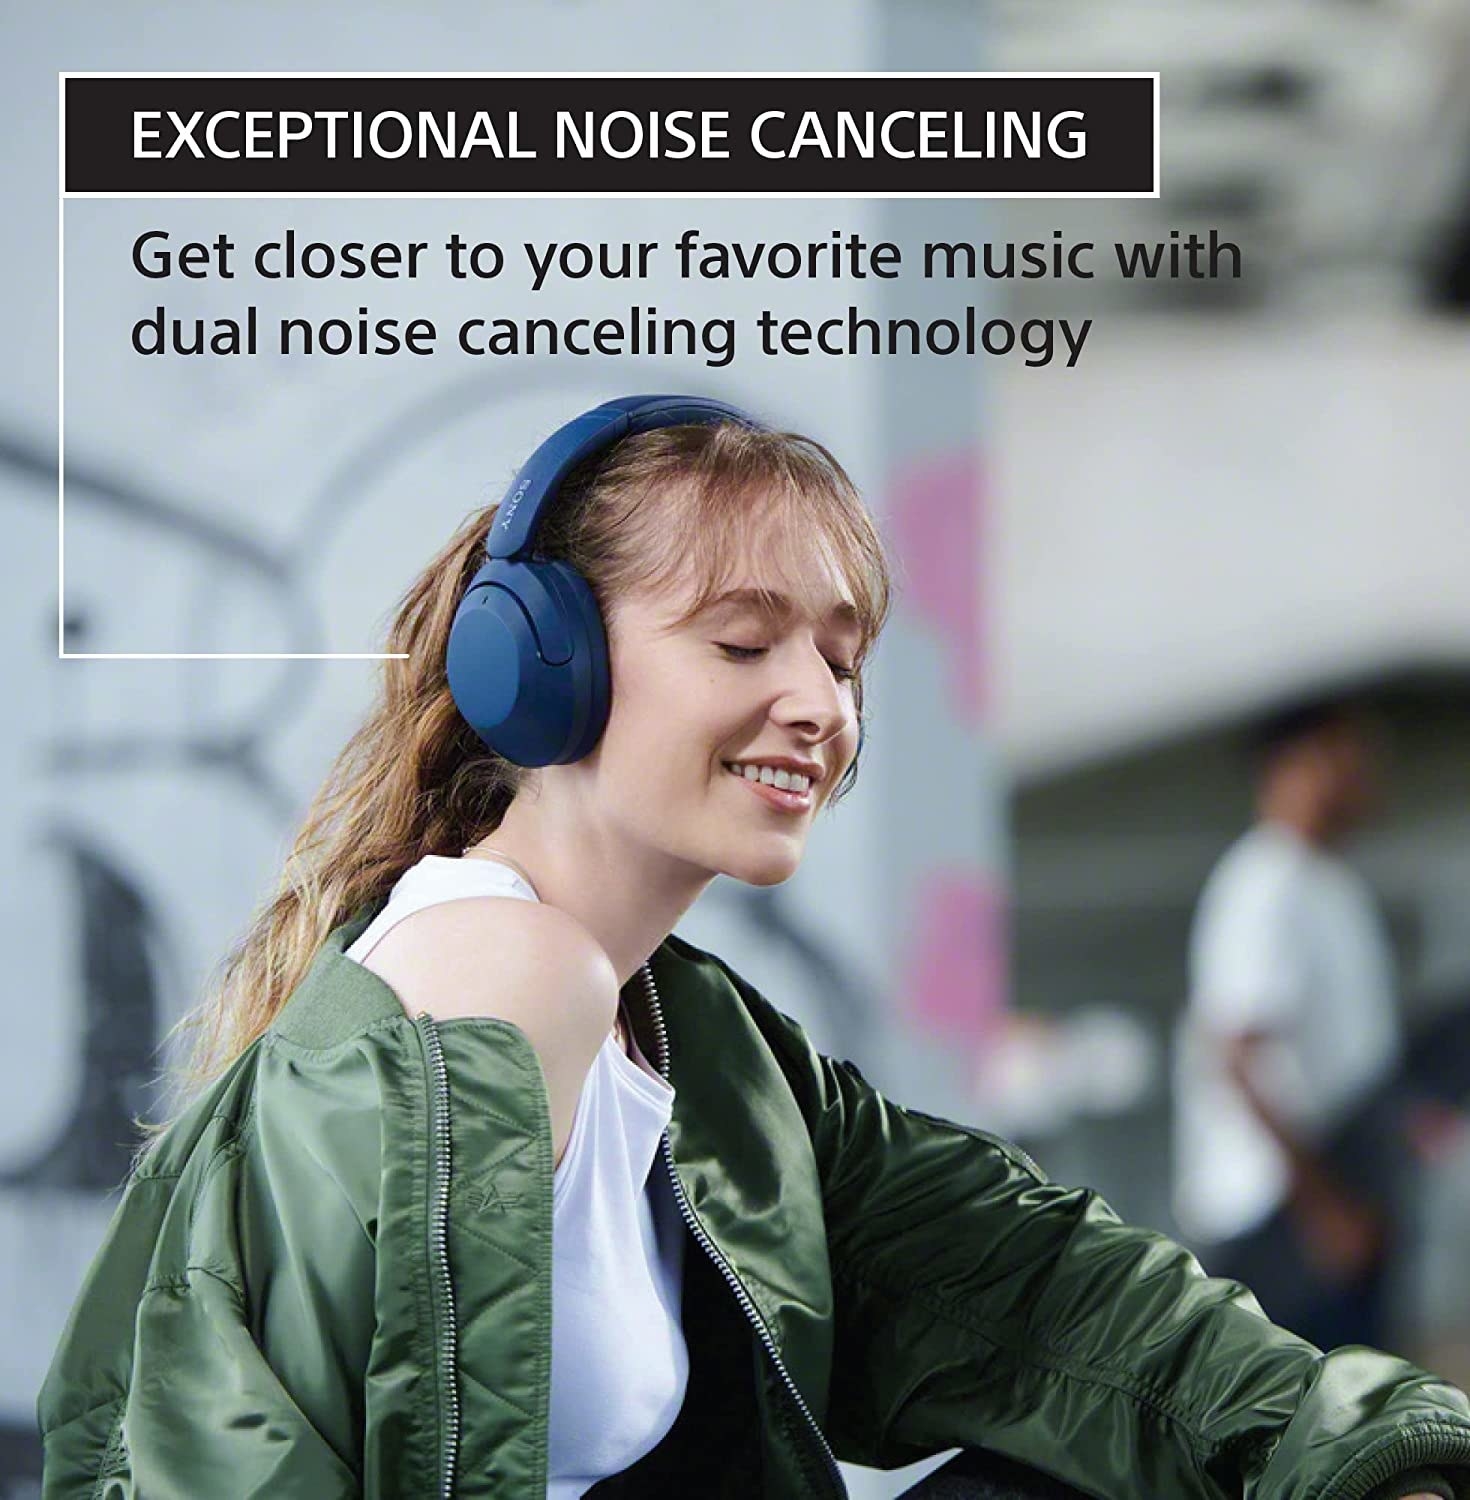 The headphones have dual noise cancelling technology